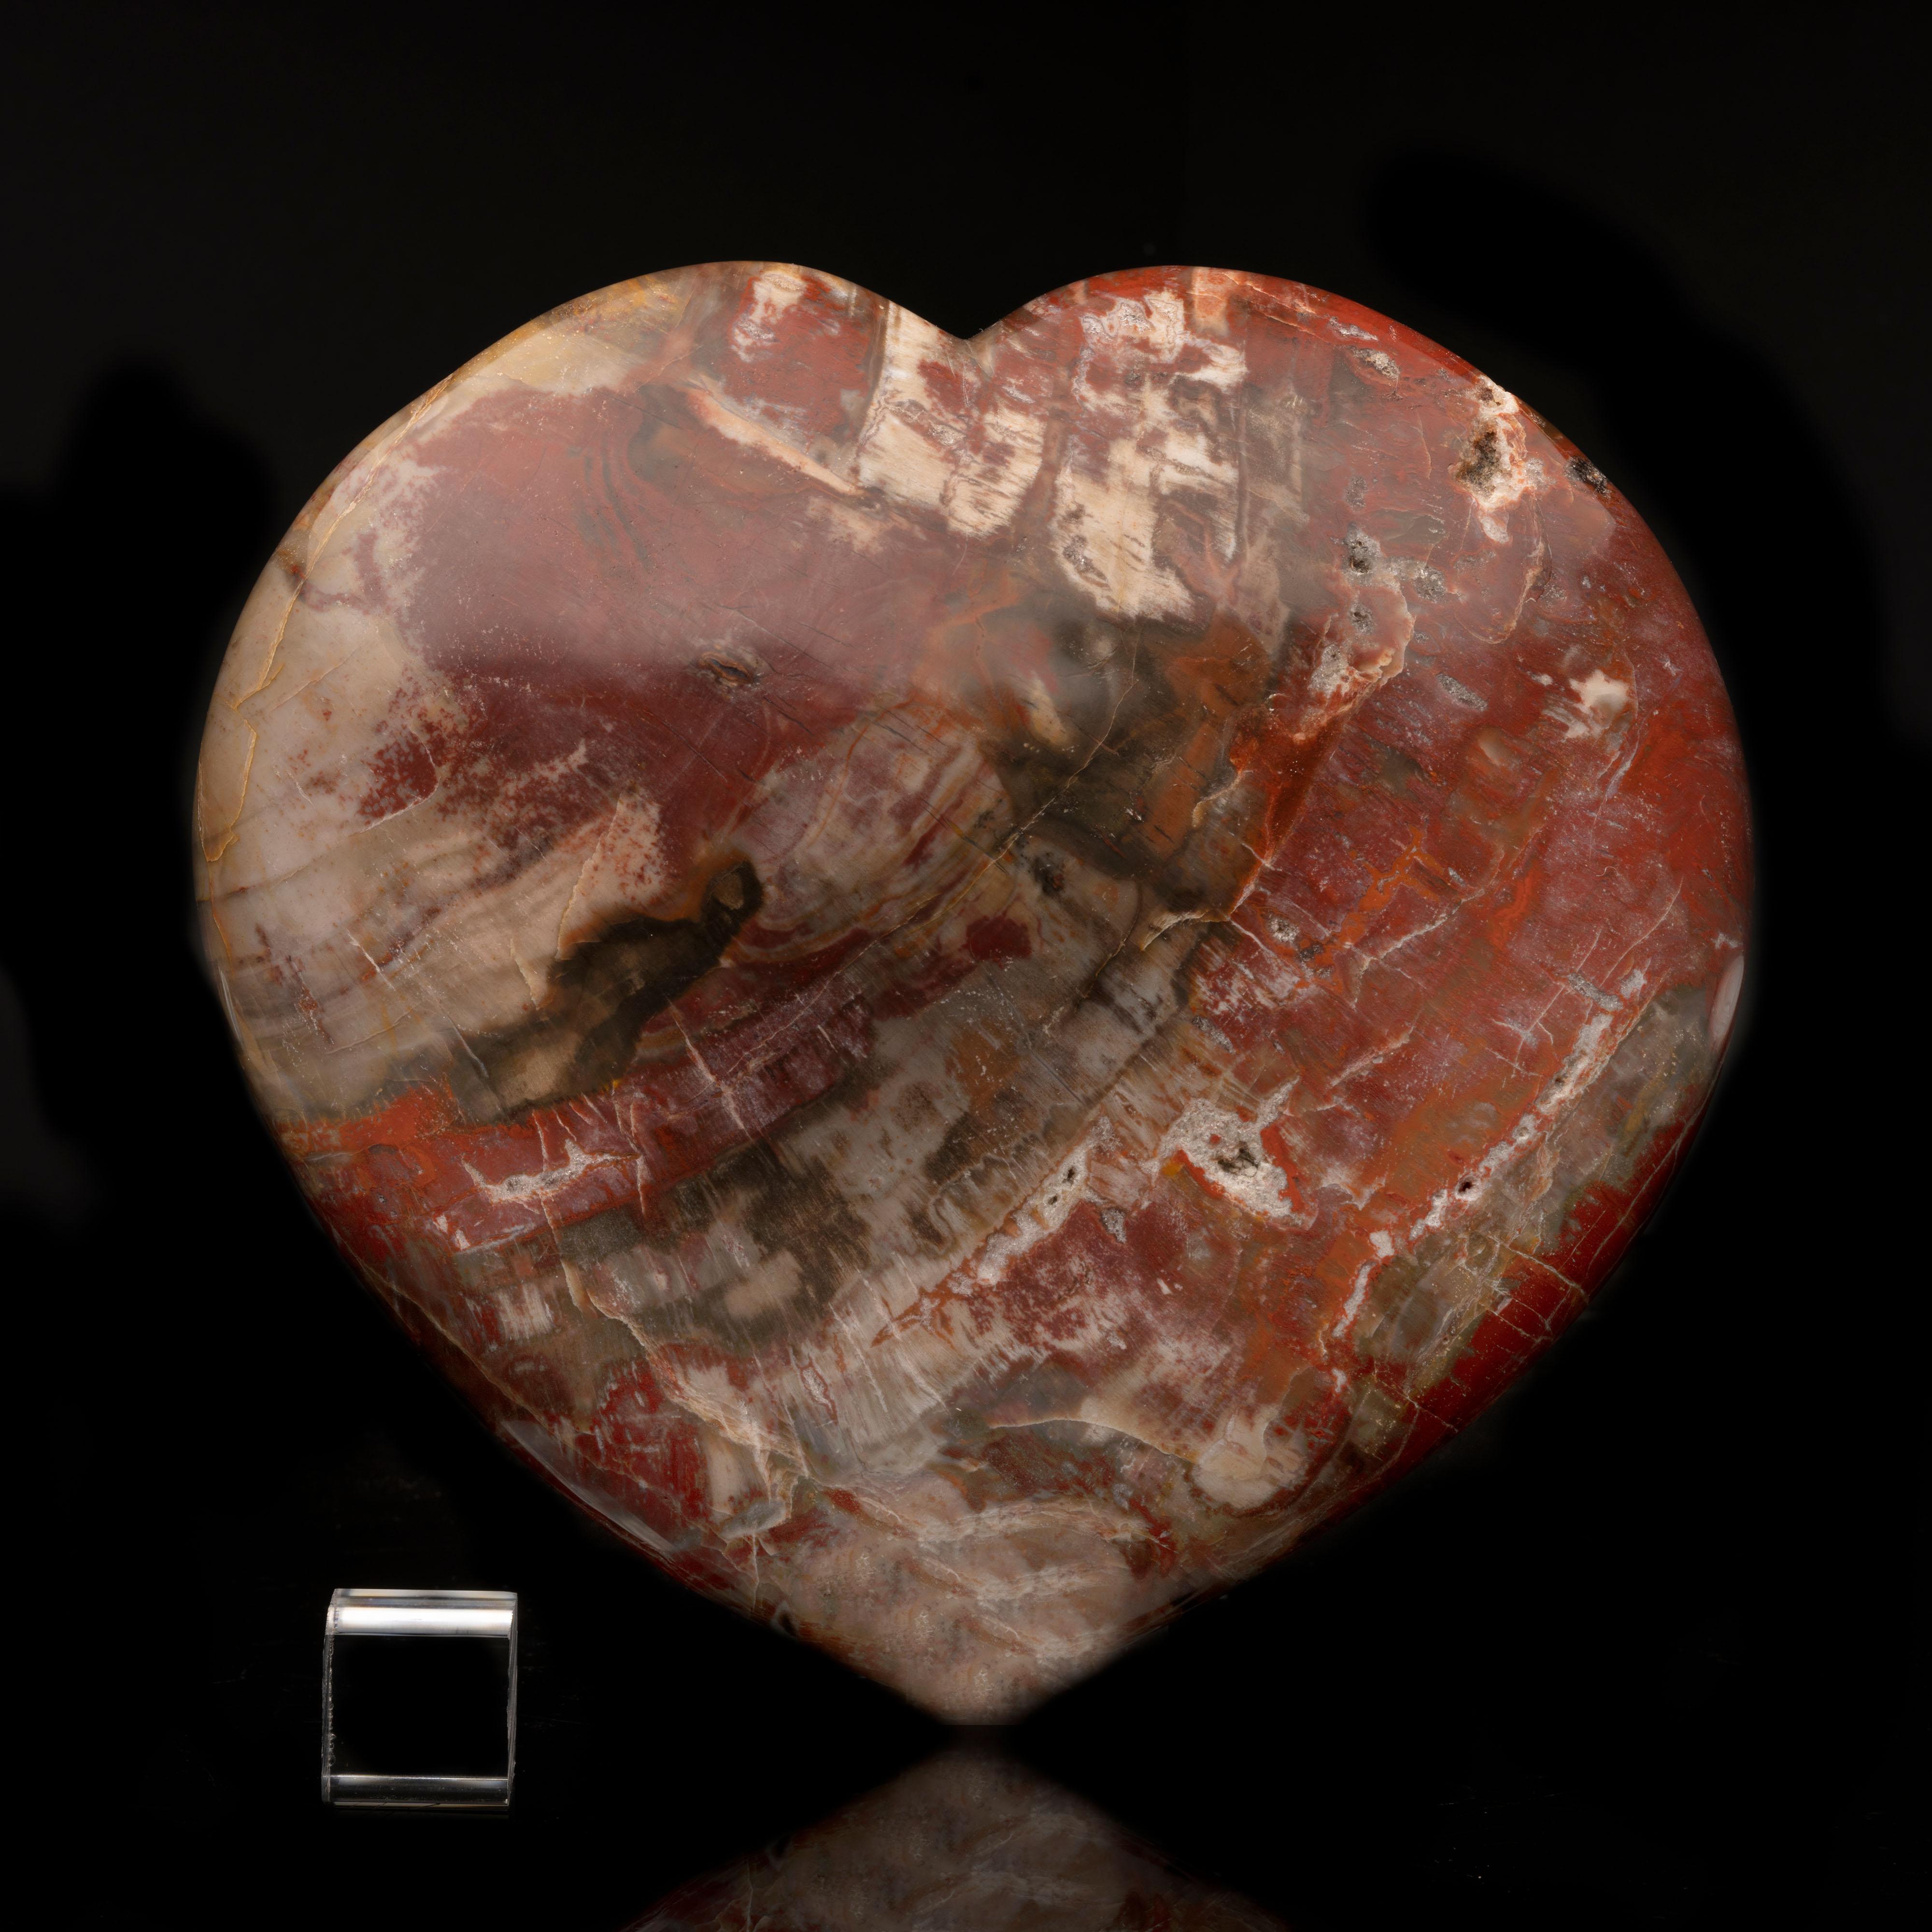 Hand-Carved Genuine 220 Million Year Old Petrified Wood Heart from Madagascar // 9 Lb For Sale